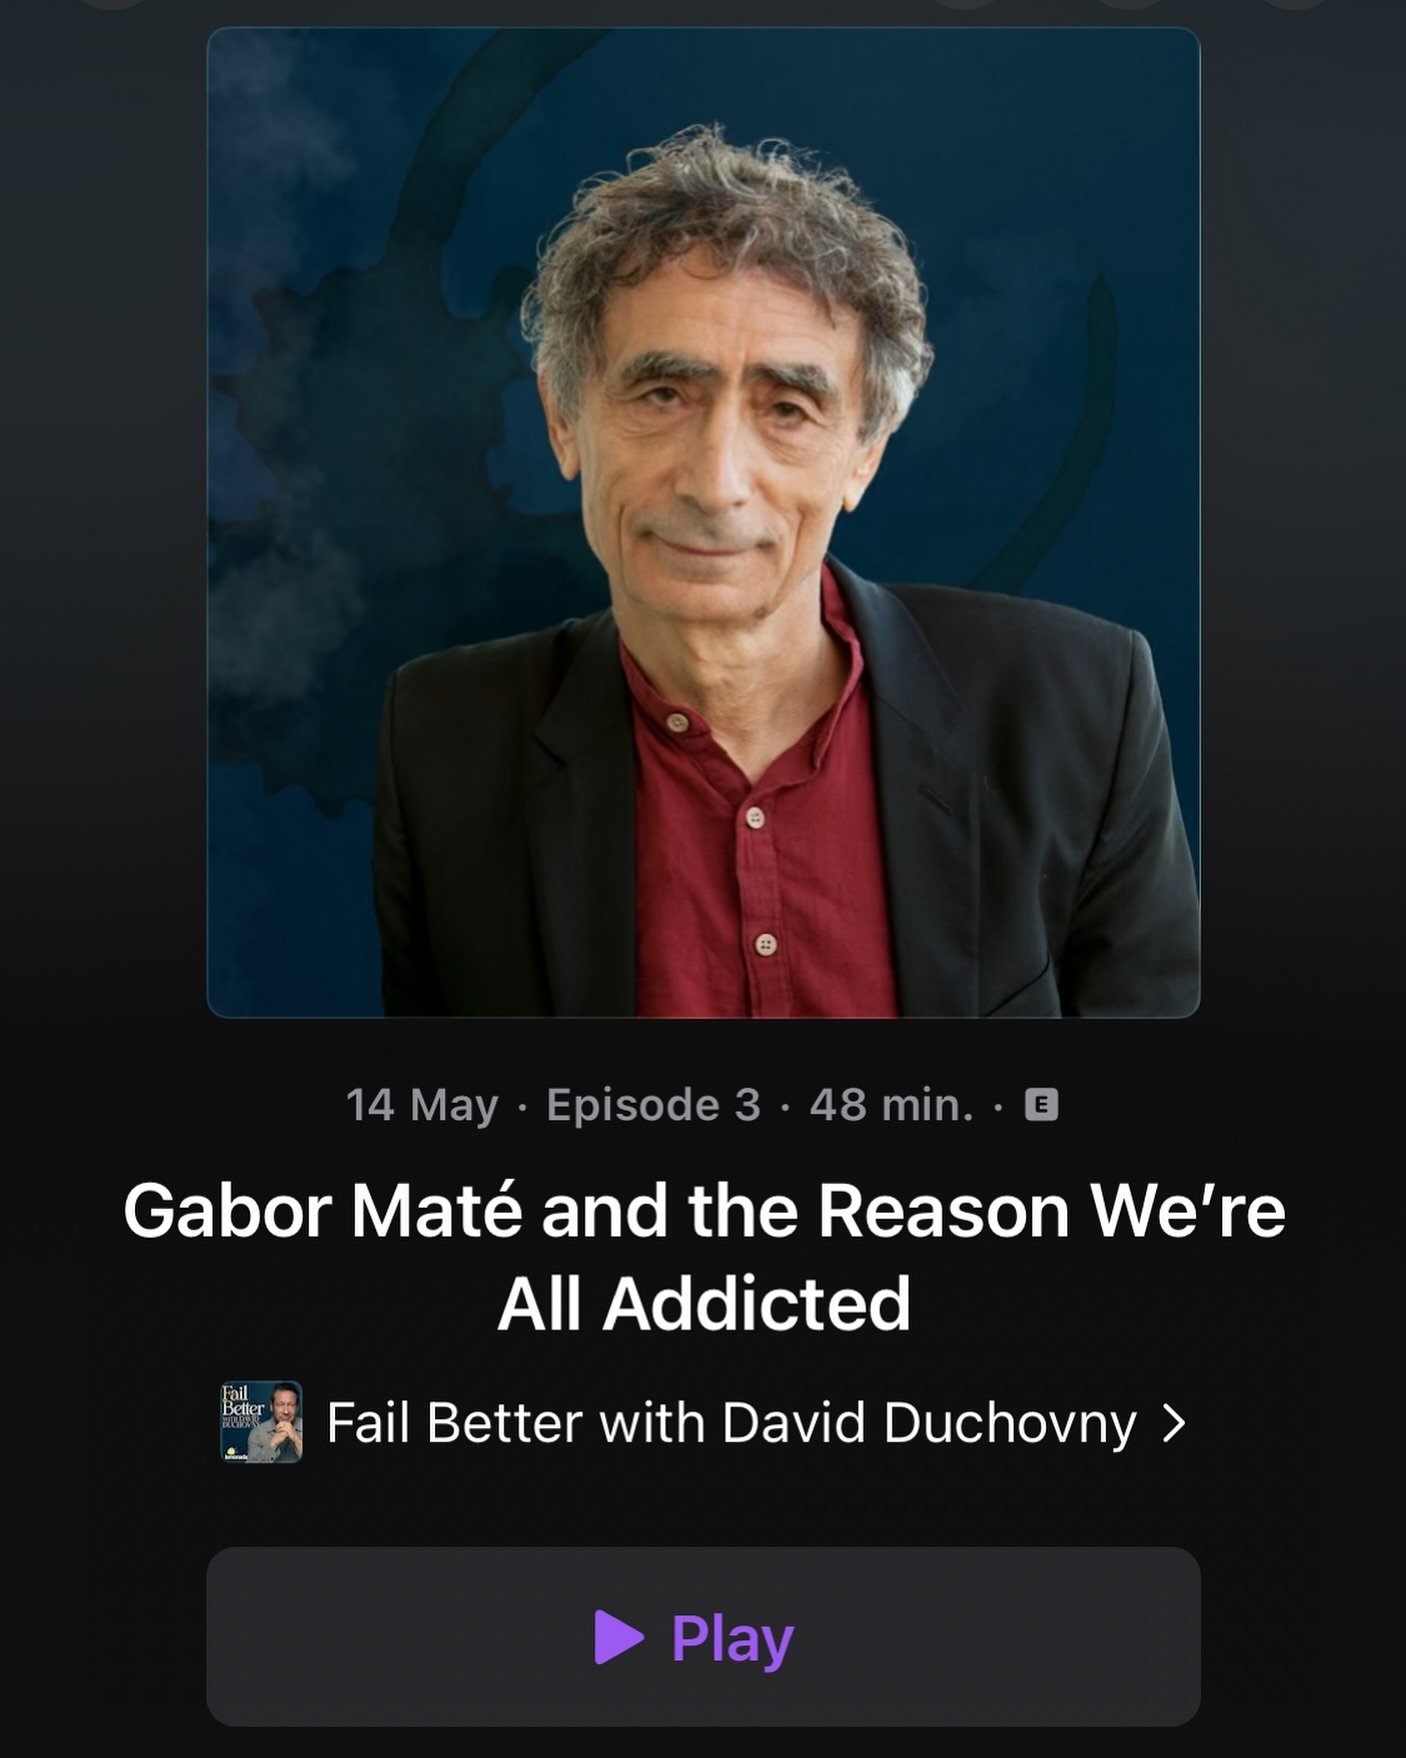 The podcast episode you didn&rsquo;t know you wanted or needed. @davidduchovny interviews @gabormatemd 

(Random story time. One time me and my little sister went to see him and his rock band play Wollongong. 

Duchovny, not Mat&eacute;. Although I&r